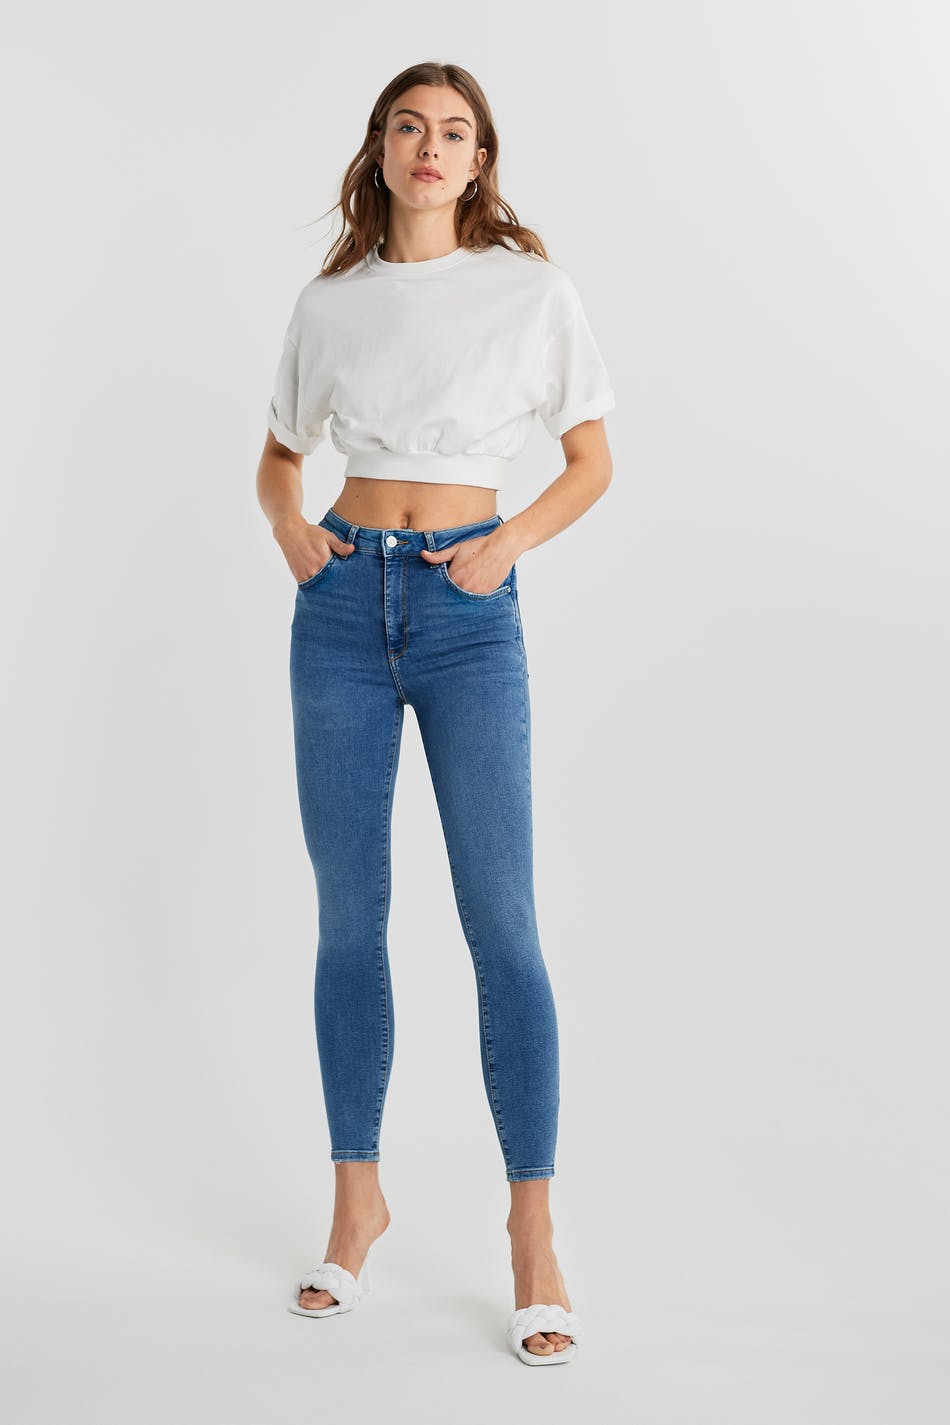 gina perfect jeans